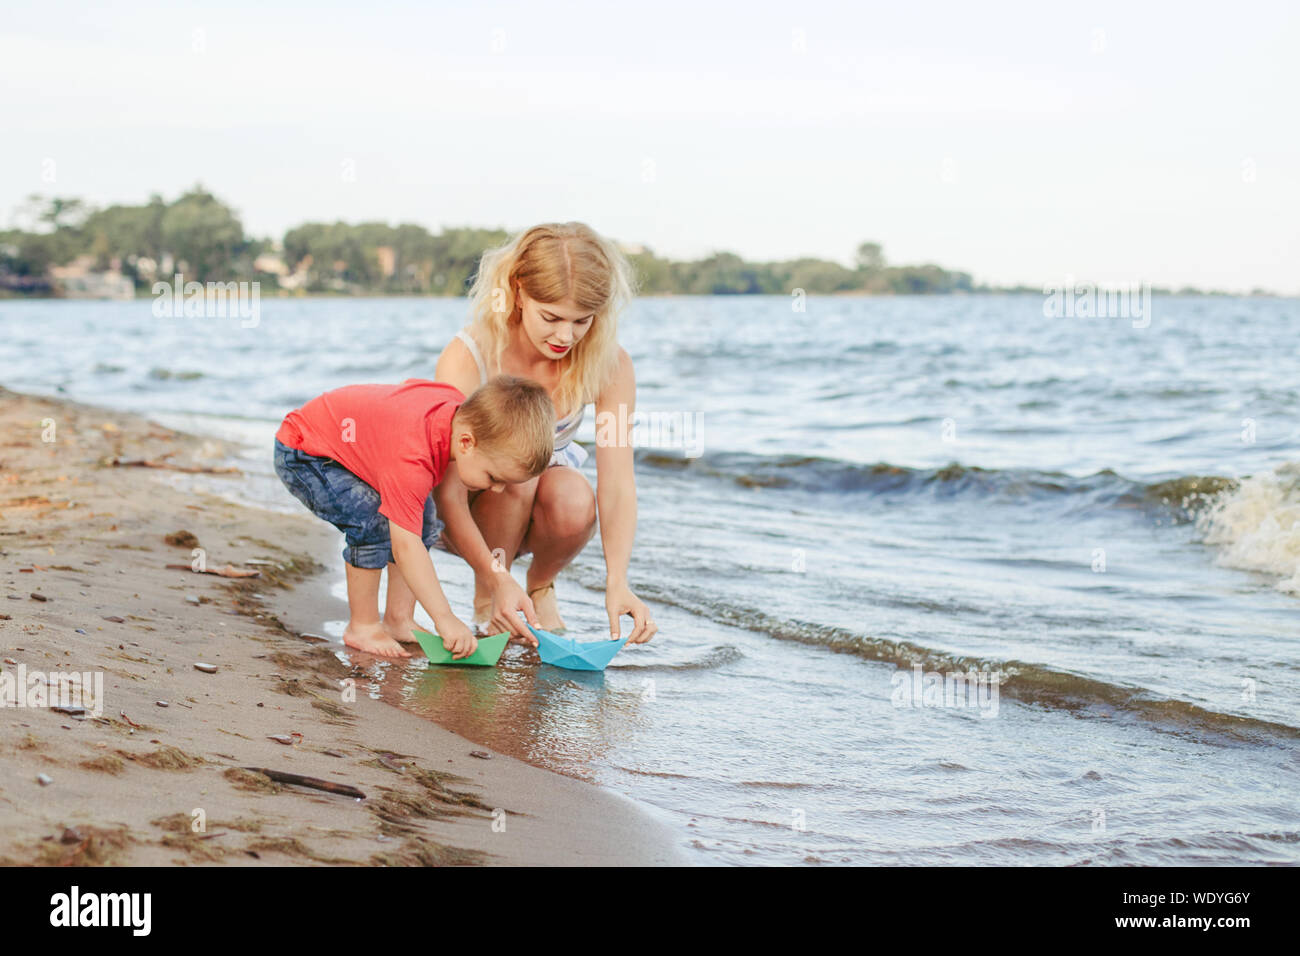 Caucasian mother with toddler son child putting paper boats in water together on lake shore. Kid playing on beach. Outdoor family summer activity. Hap Stock Photo